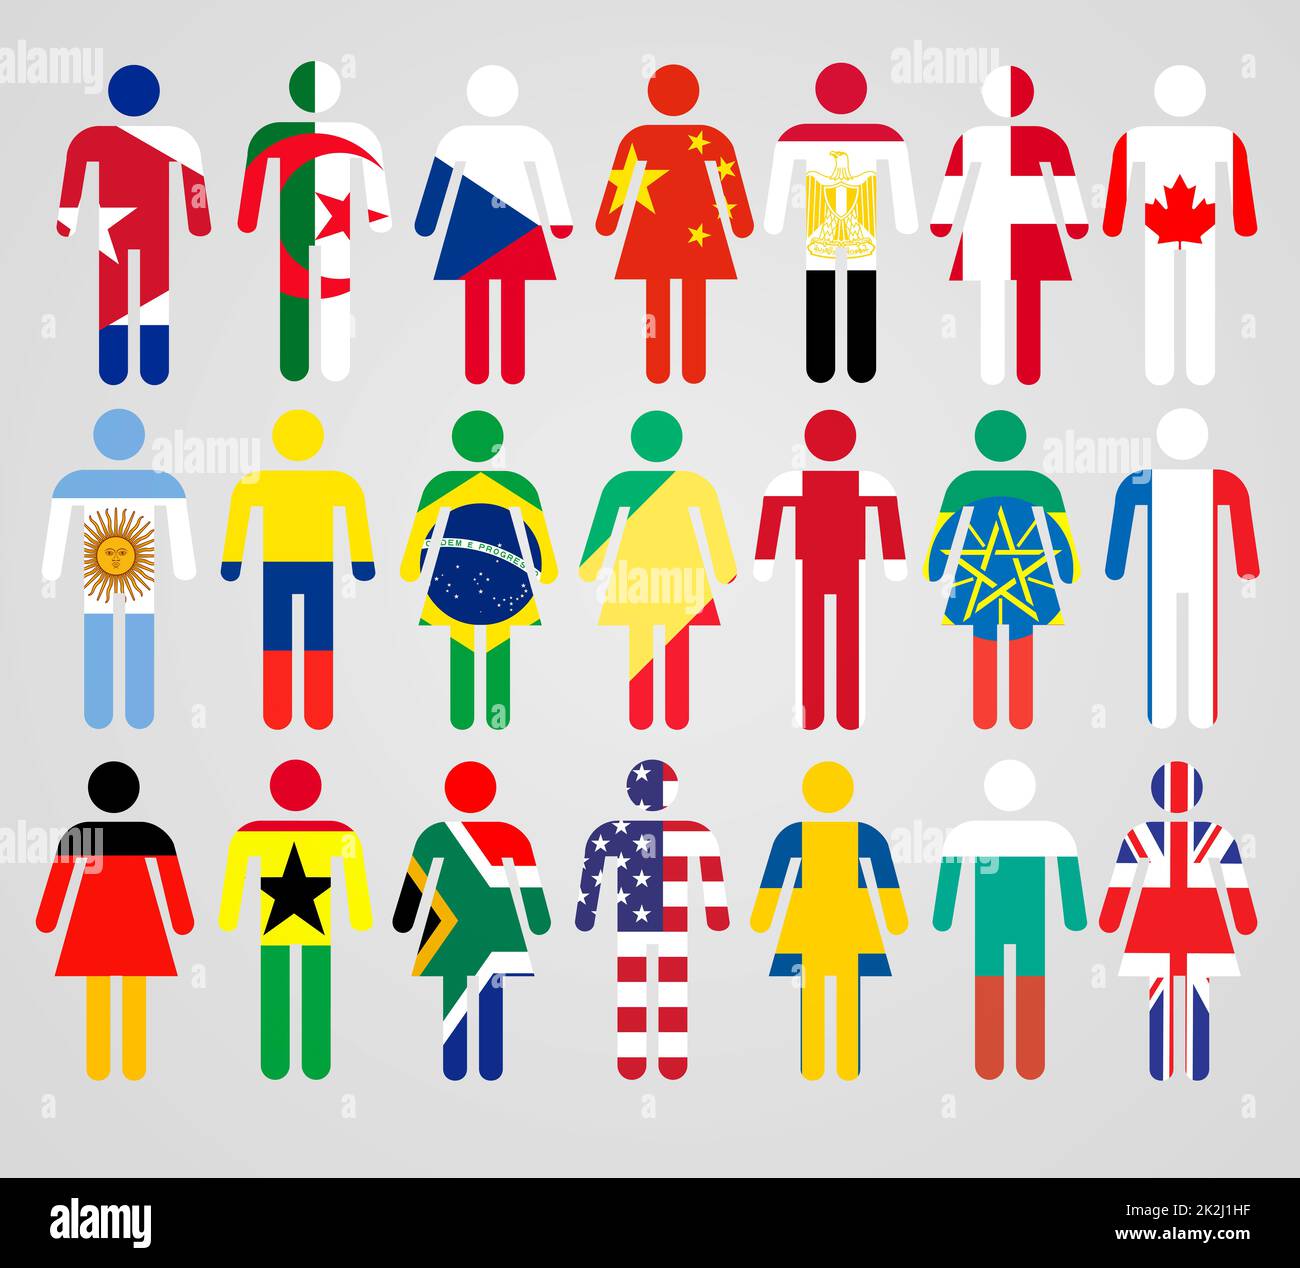 So different, yet all the same. Representations of people with different nationalities. Stock Photo